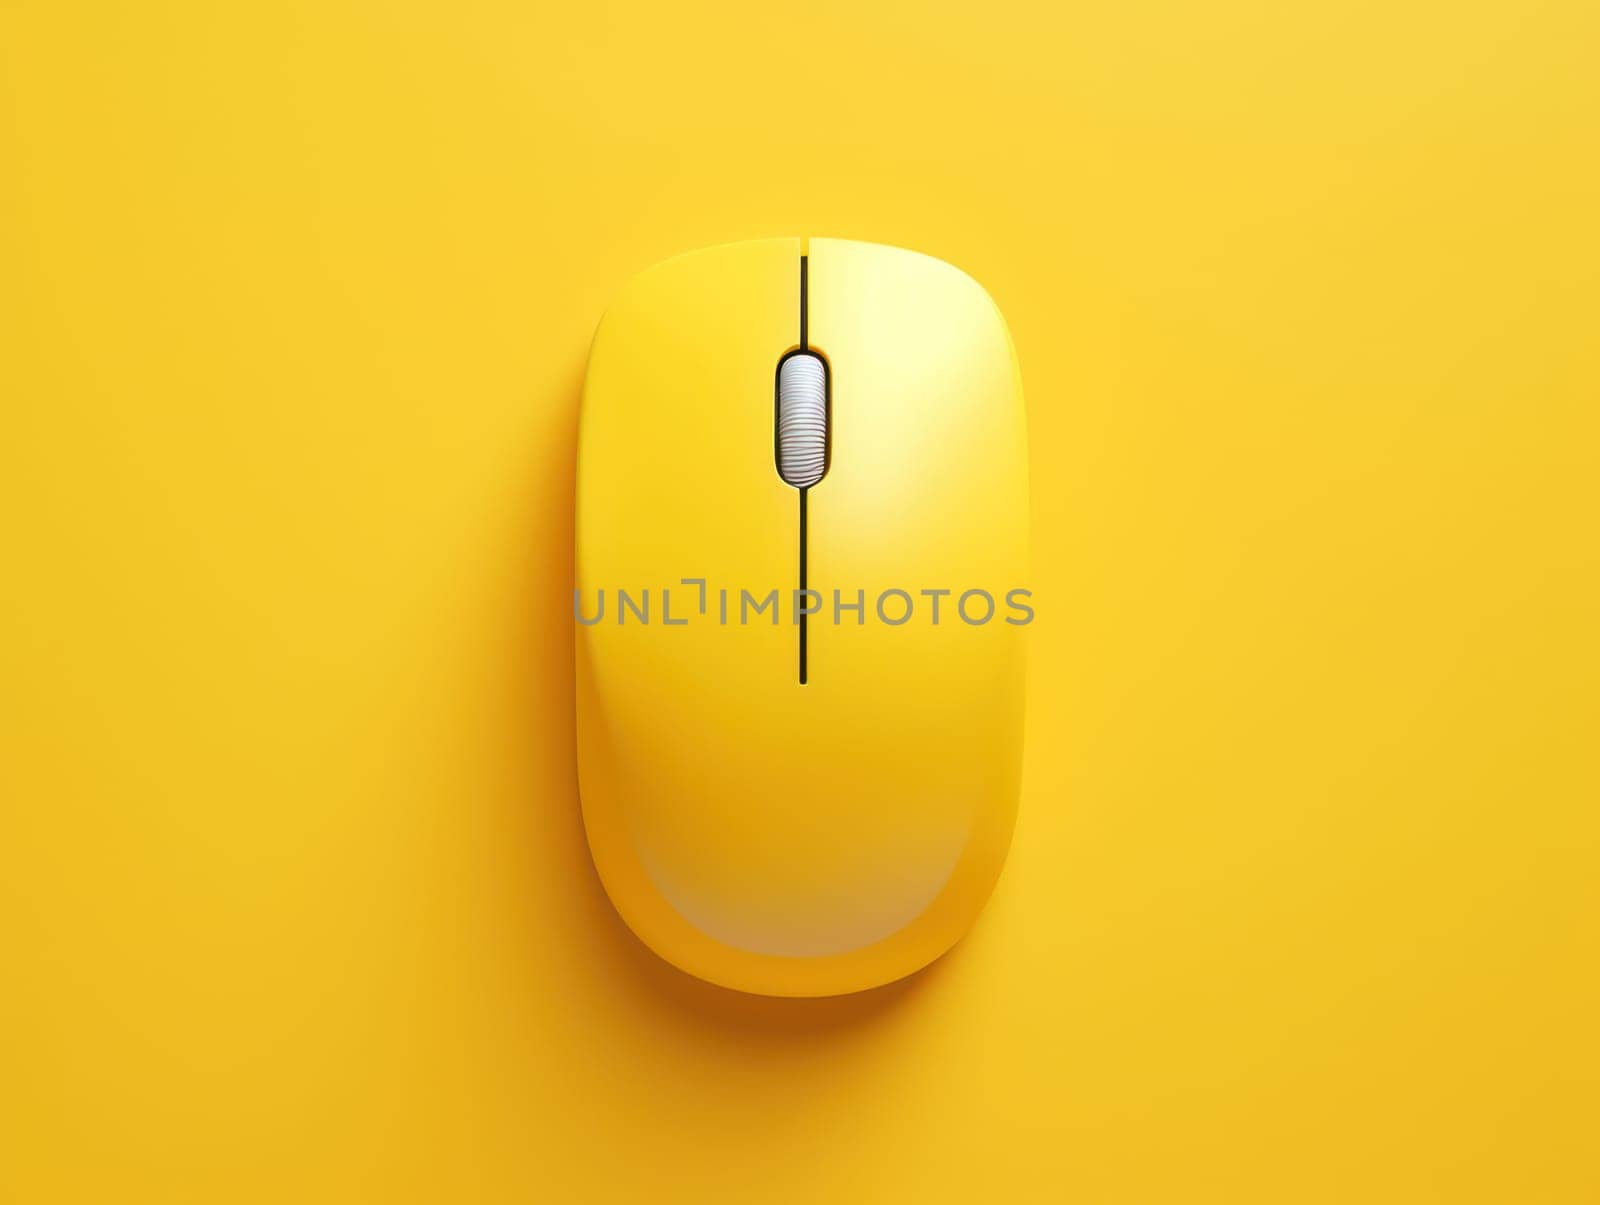 Modern Minimalist Computer Mouse on White Background, a Technology Device for Efficient Business Communication and Work